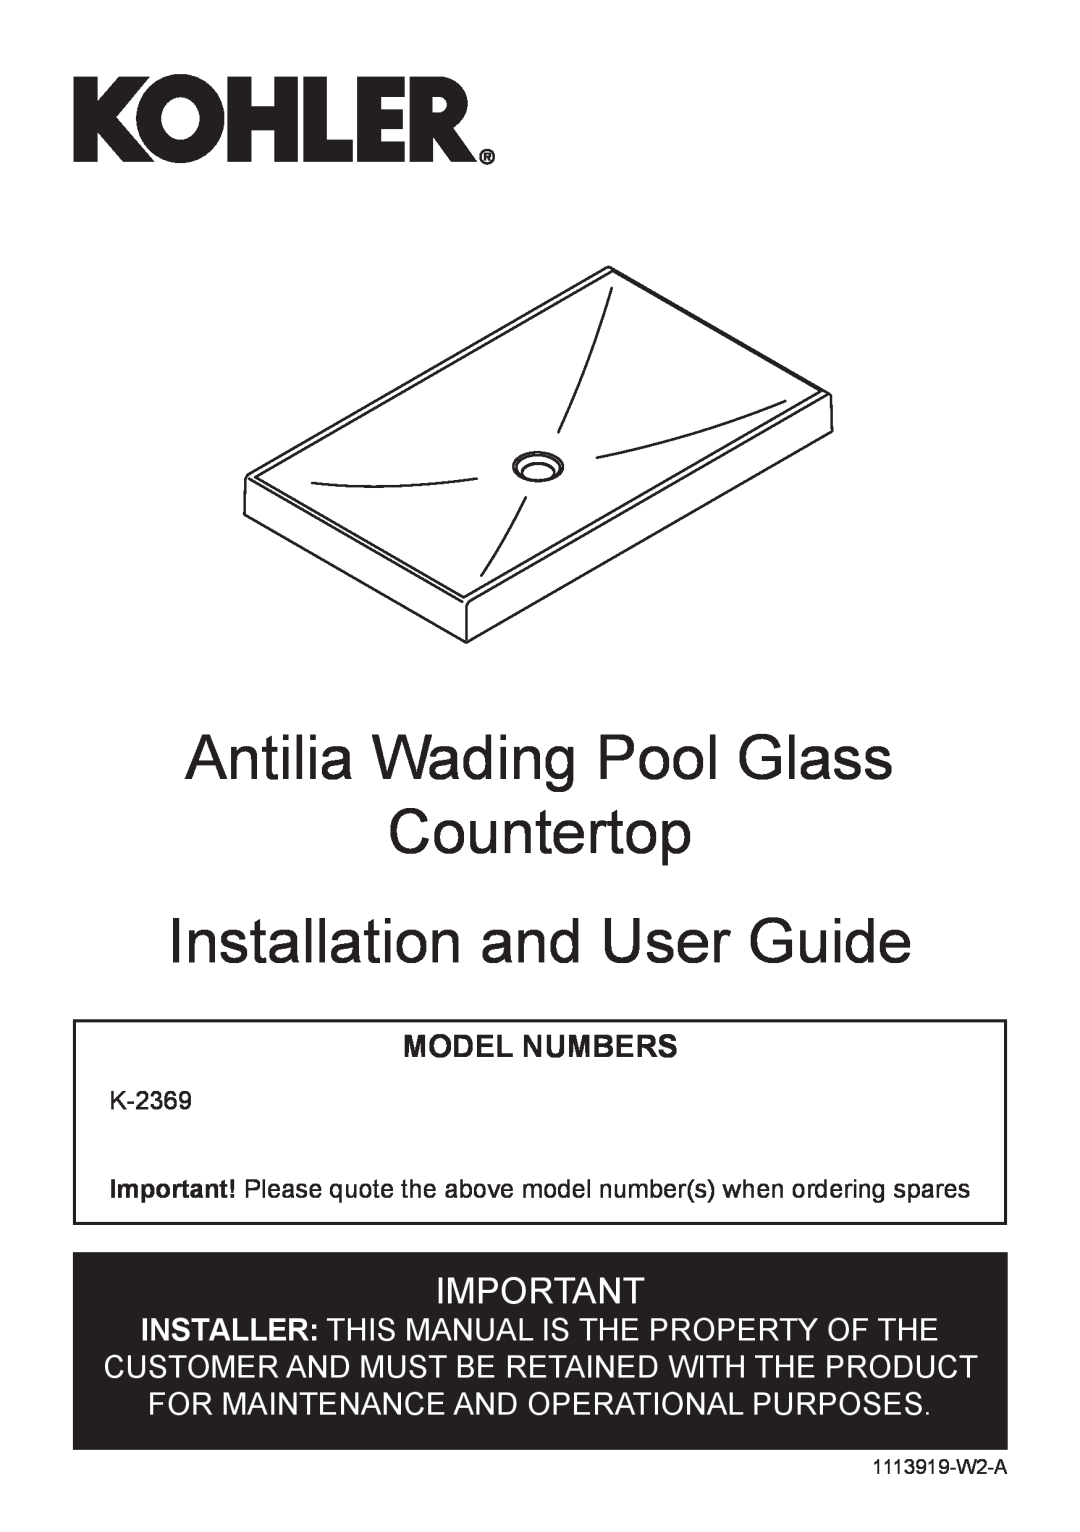 Premium Home Creations K-2369 manual Antilia Wading Pool Glass Countertop Installation and User Guide, Model Numbers 